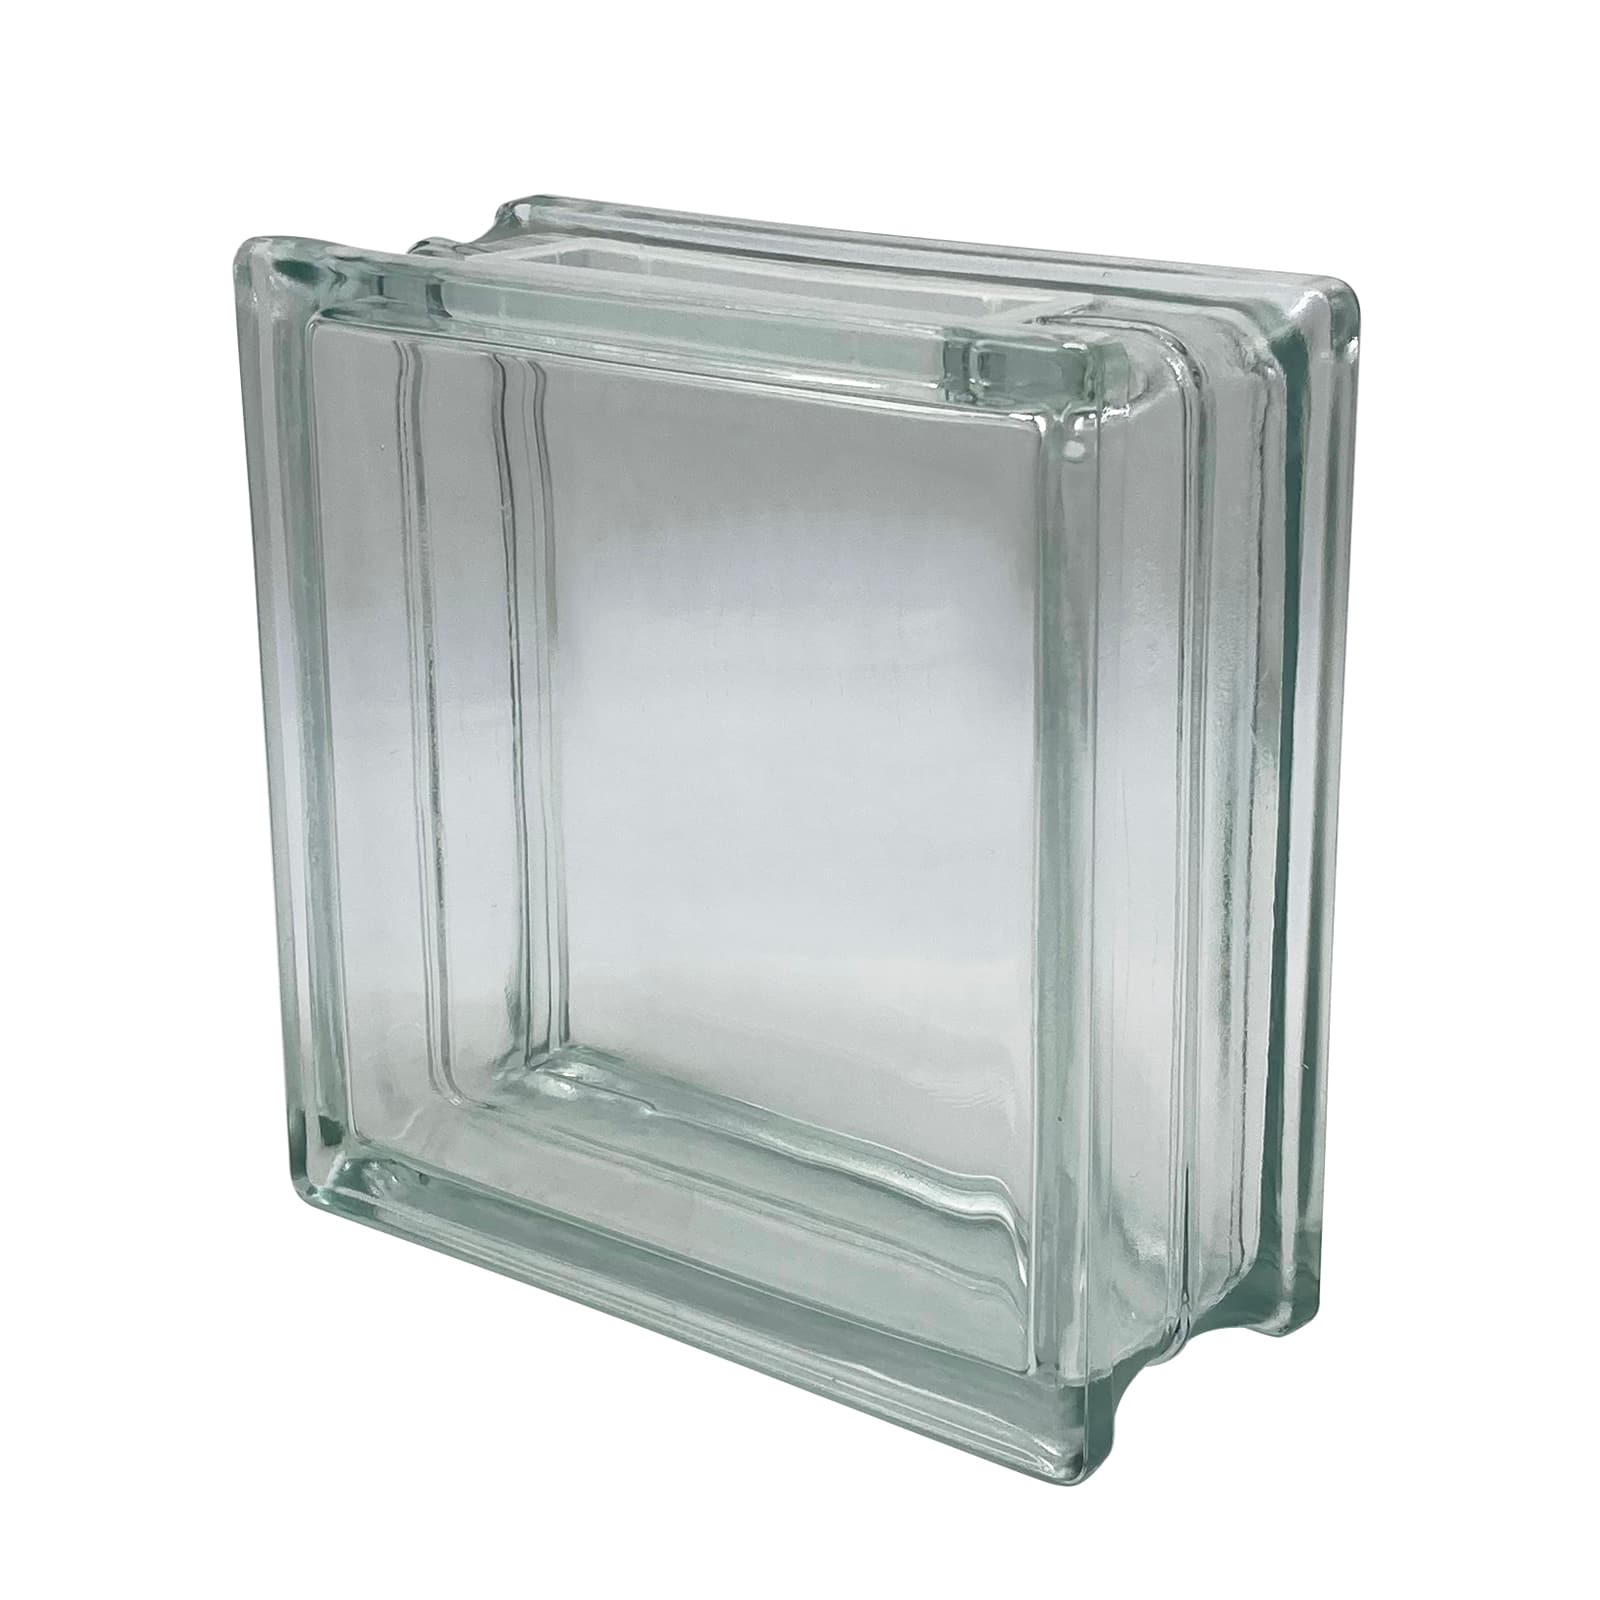 Decorative Glass Block For Crafts